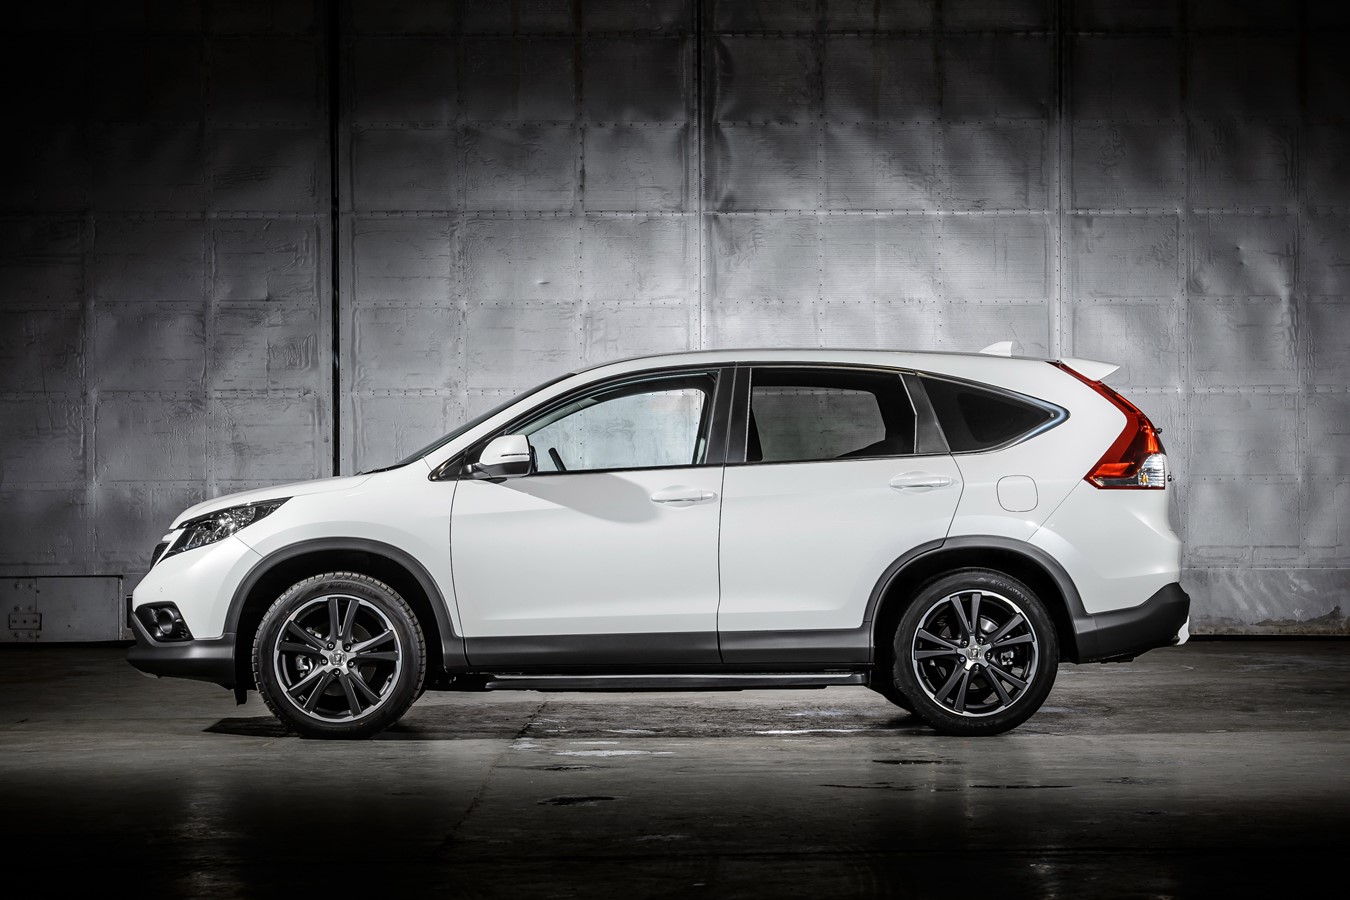 Which? Car Survey crowns Honda CR-V ‘Most Reliable SUV’ 2014